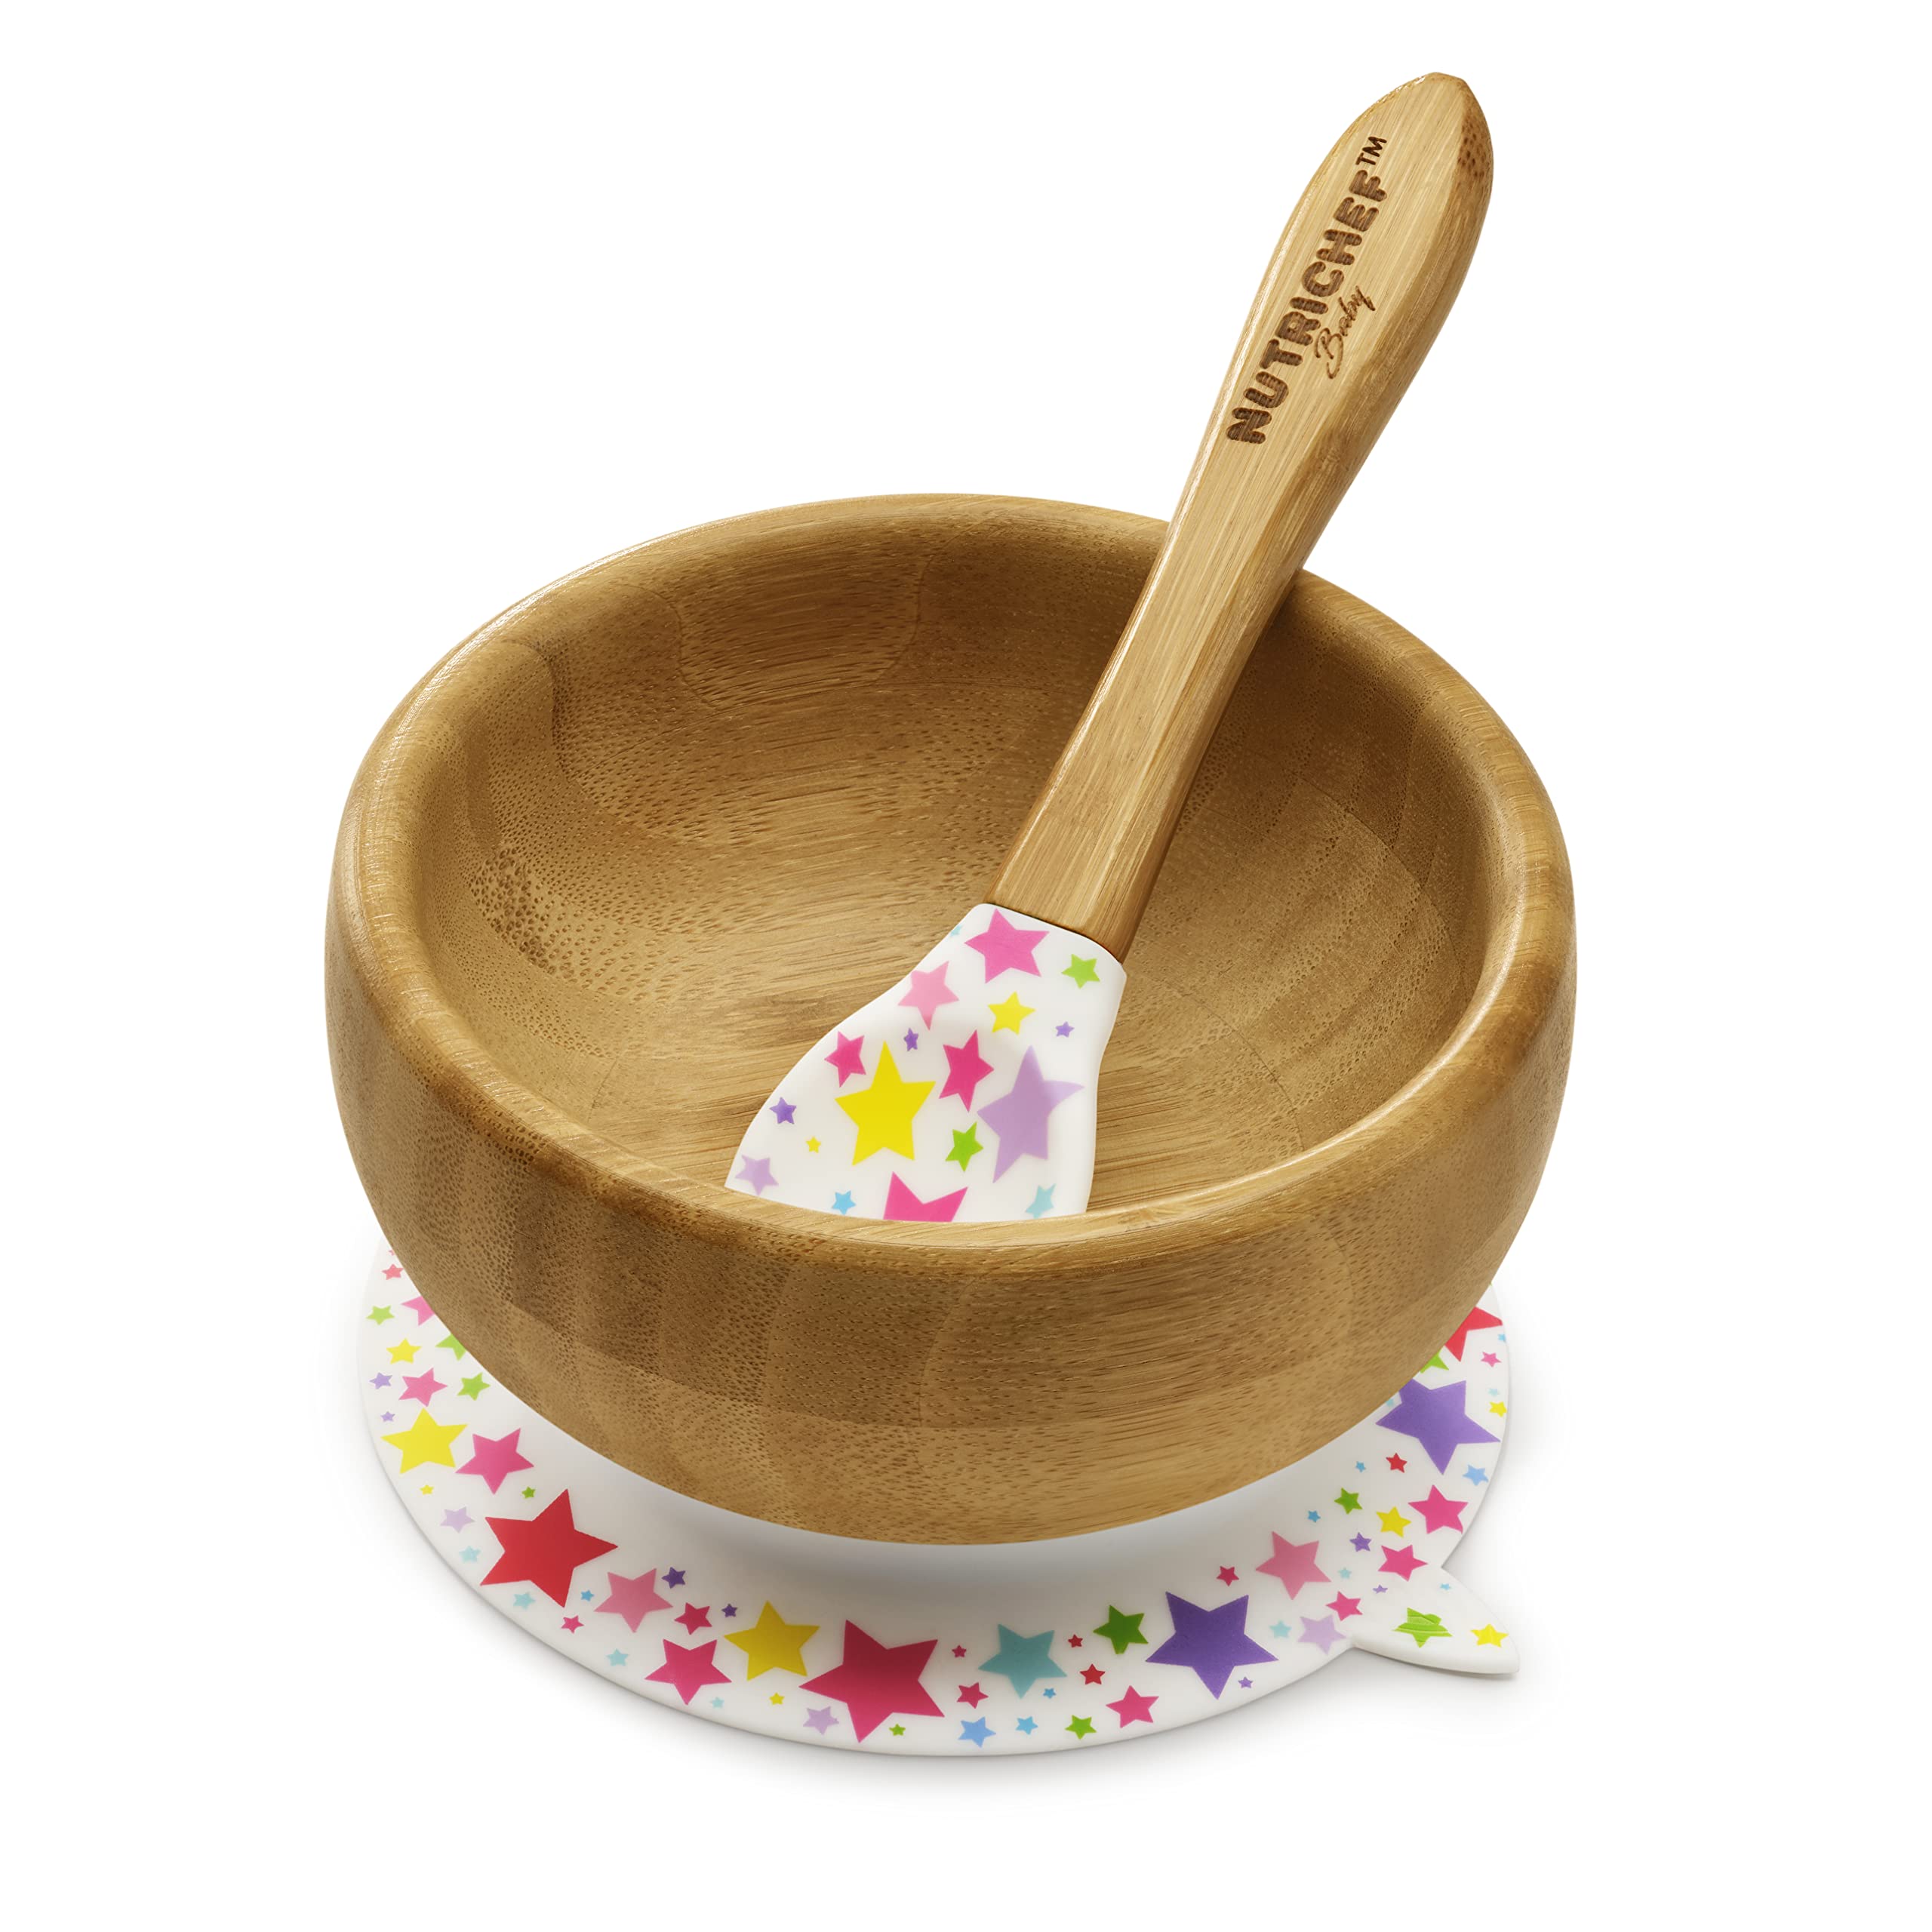 2-Pc NutriChef Wooden Bamboo Baby Feeding Bowl & Spoon Set w/ Silicone Suction Base (Stars) $8 + Free Shipping w/ Prime or on $25+